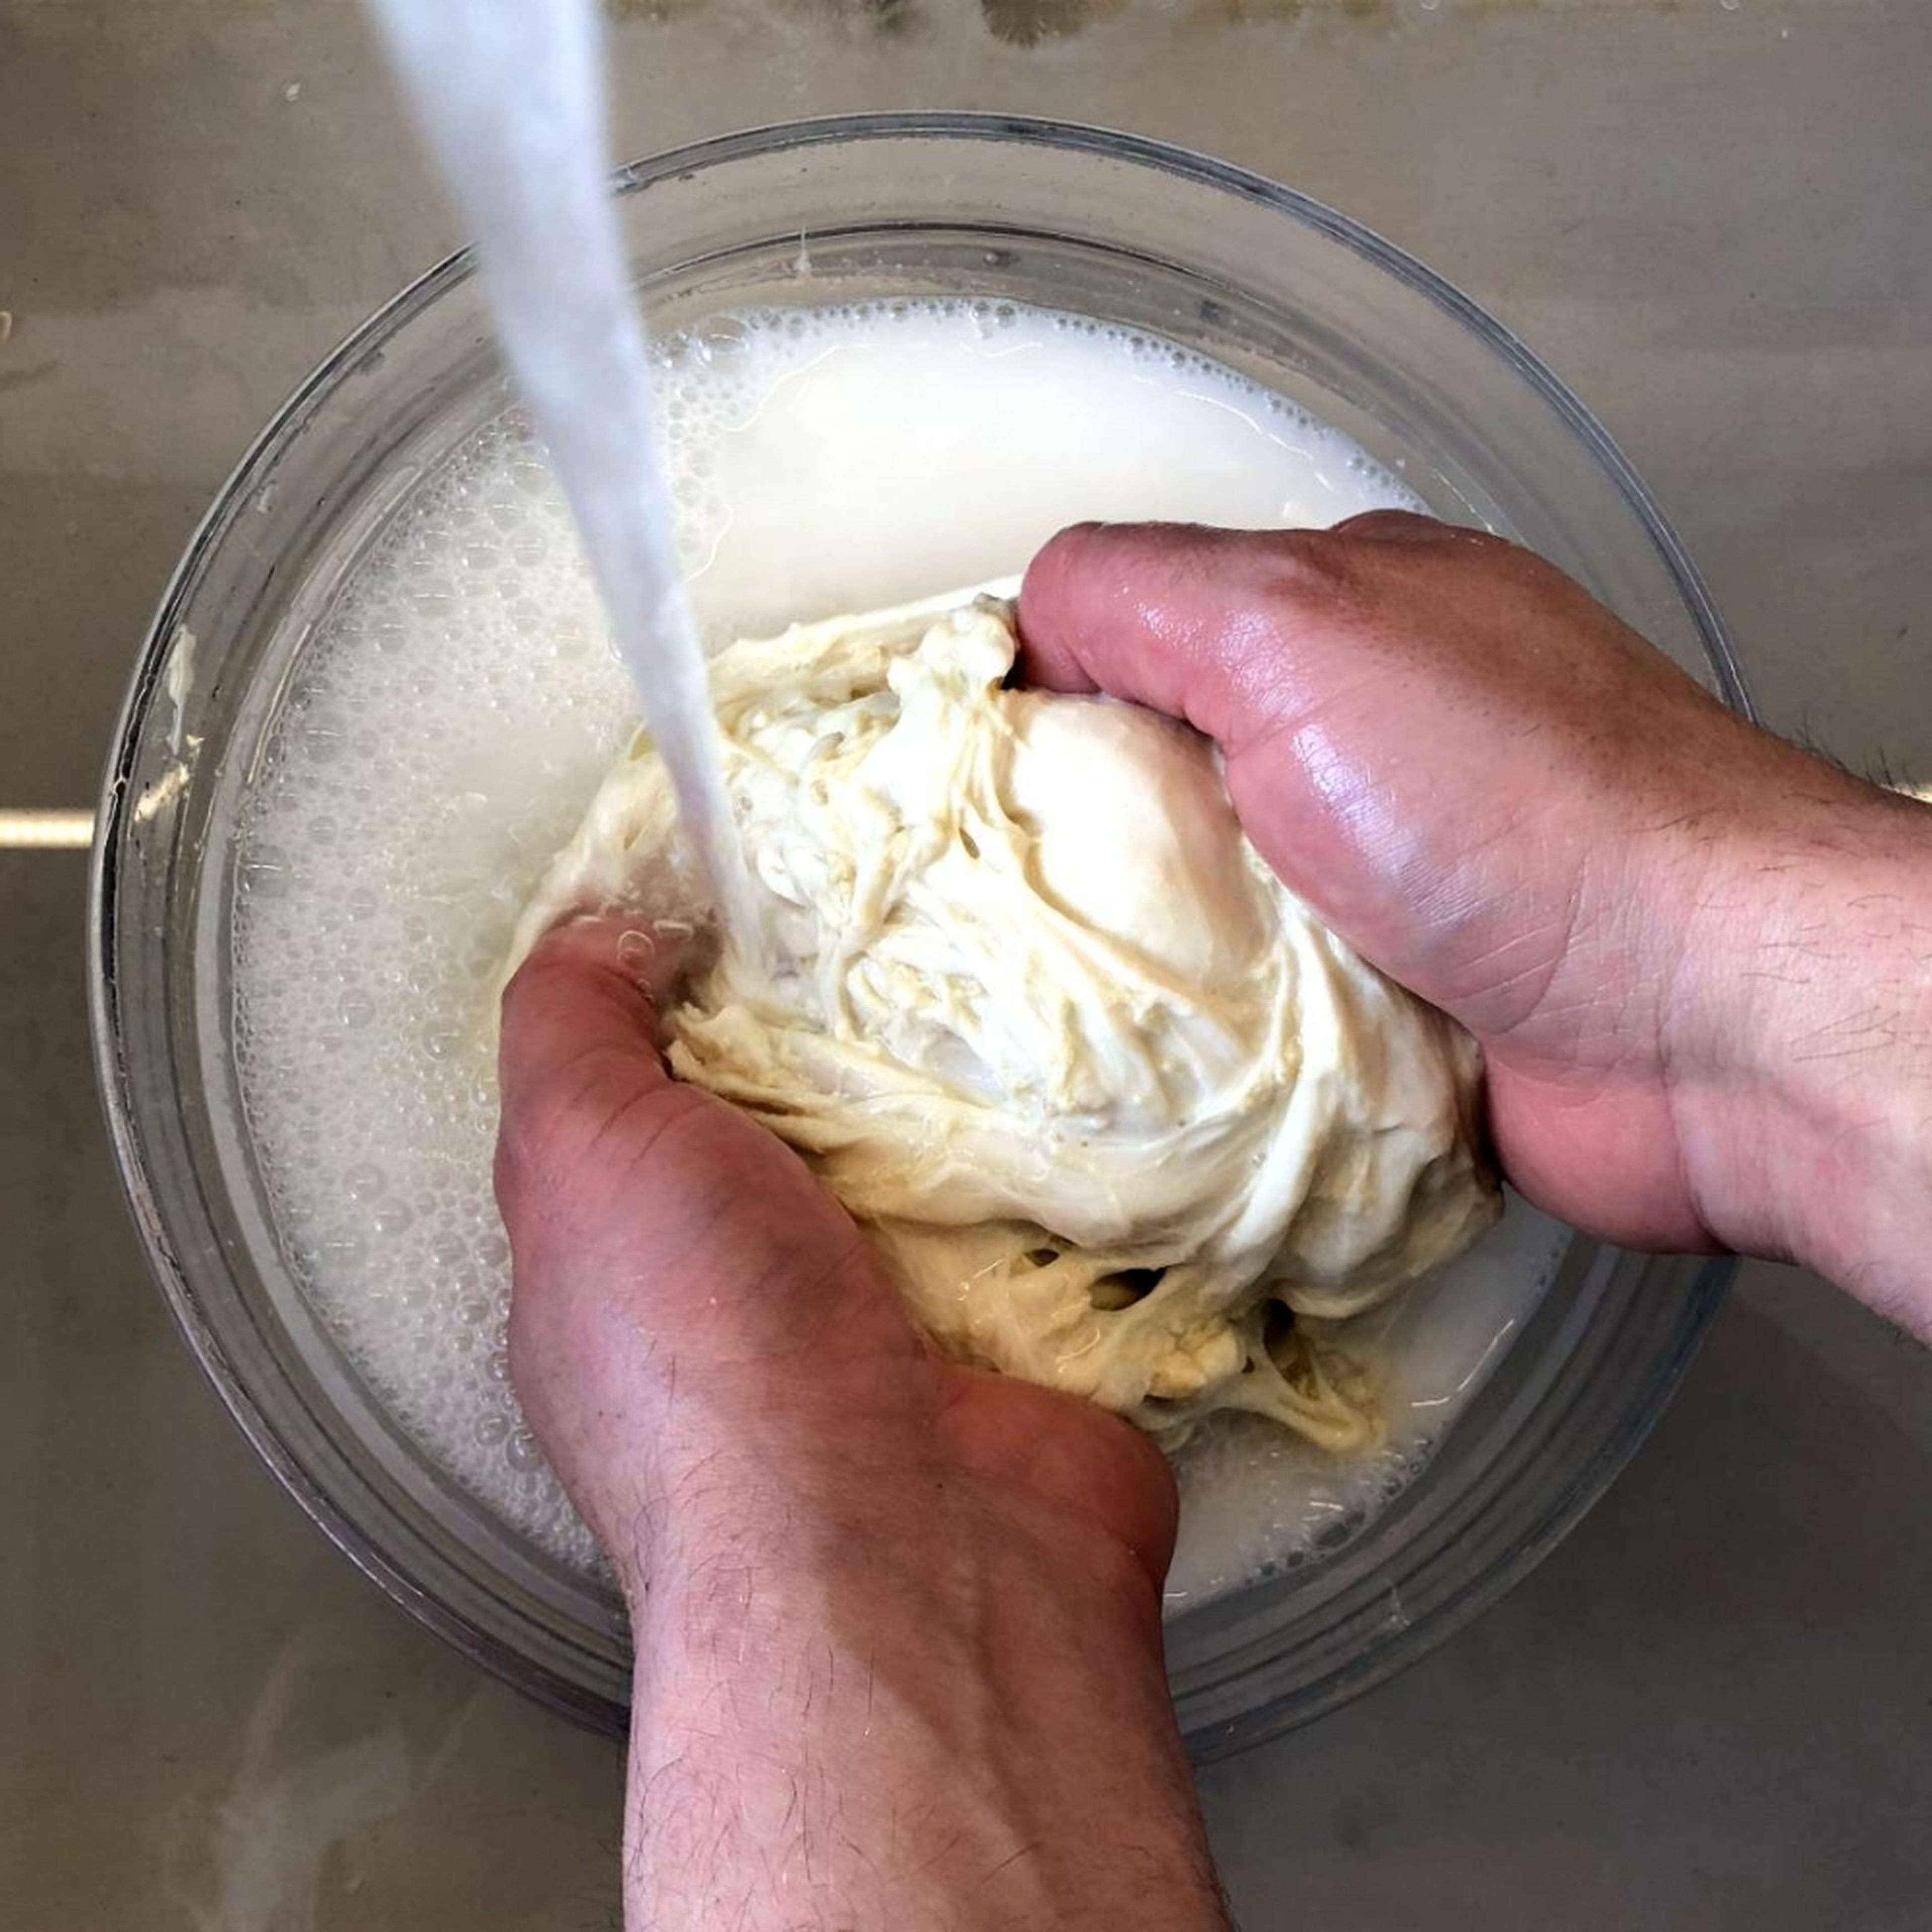 Rinse the dough thoroughly under cold water until the water in the bowl runs clear.